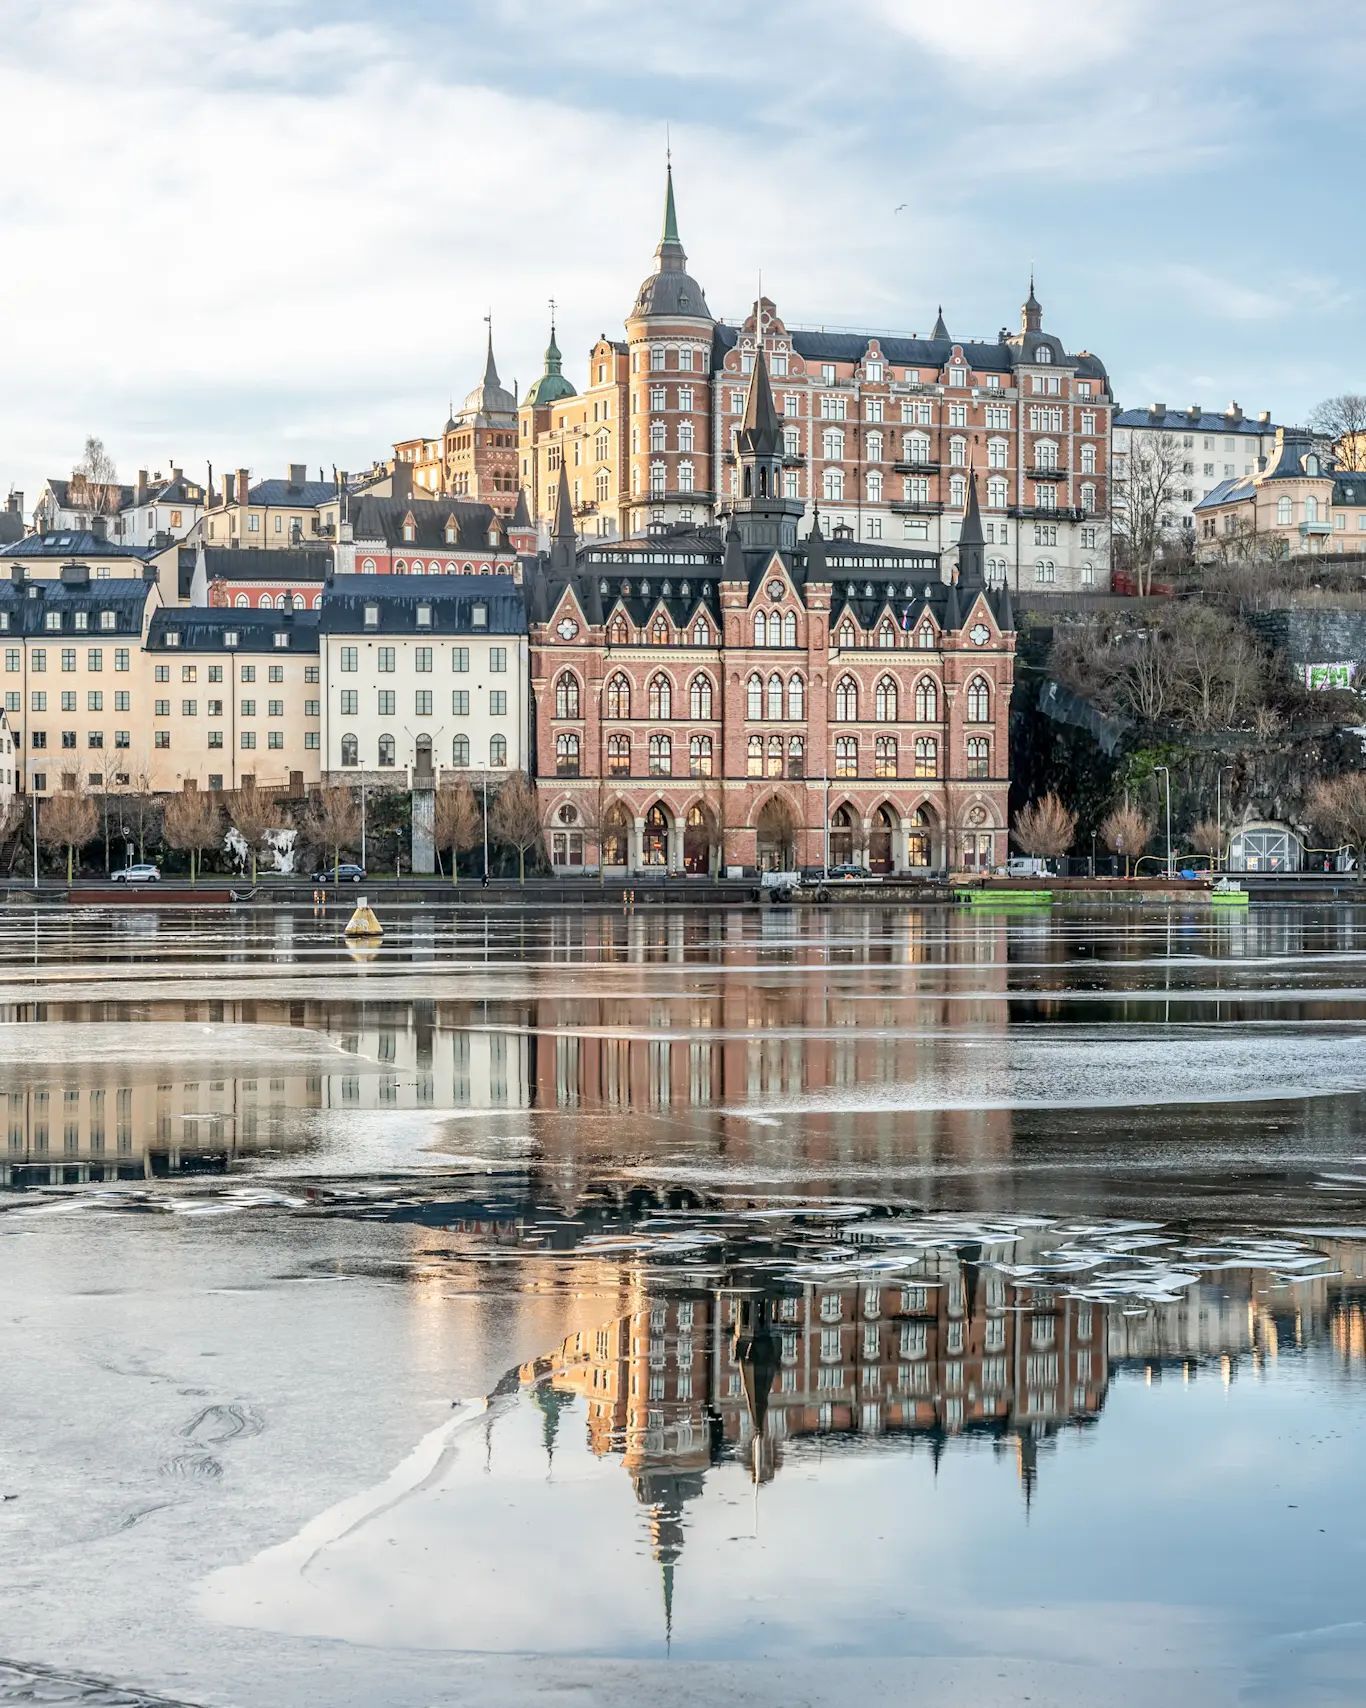 From Sweden to Spain: tourists have already booked hotels for this season